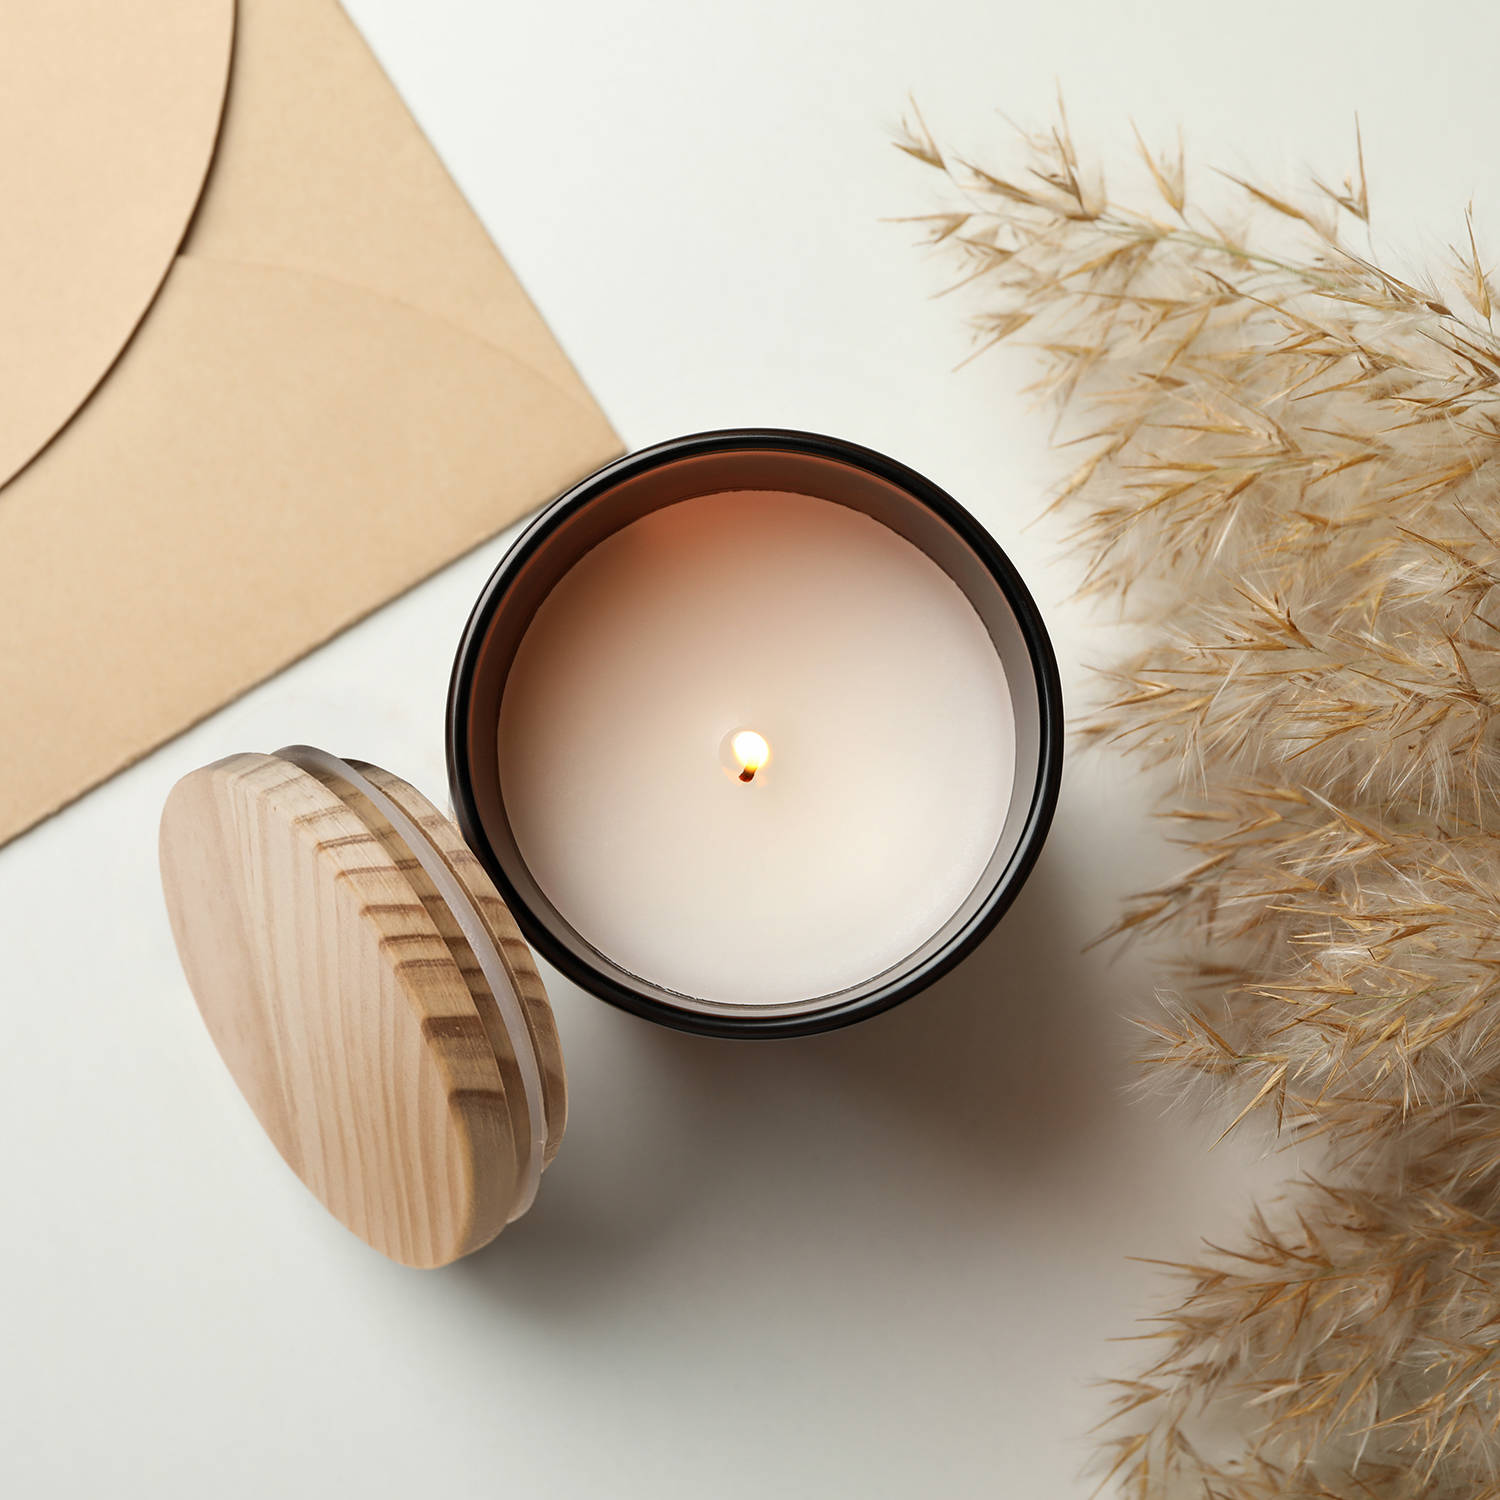 Scented candle, envelope and reed on white background